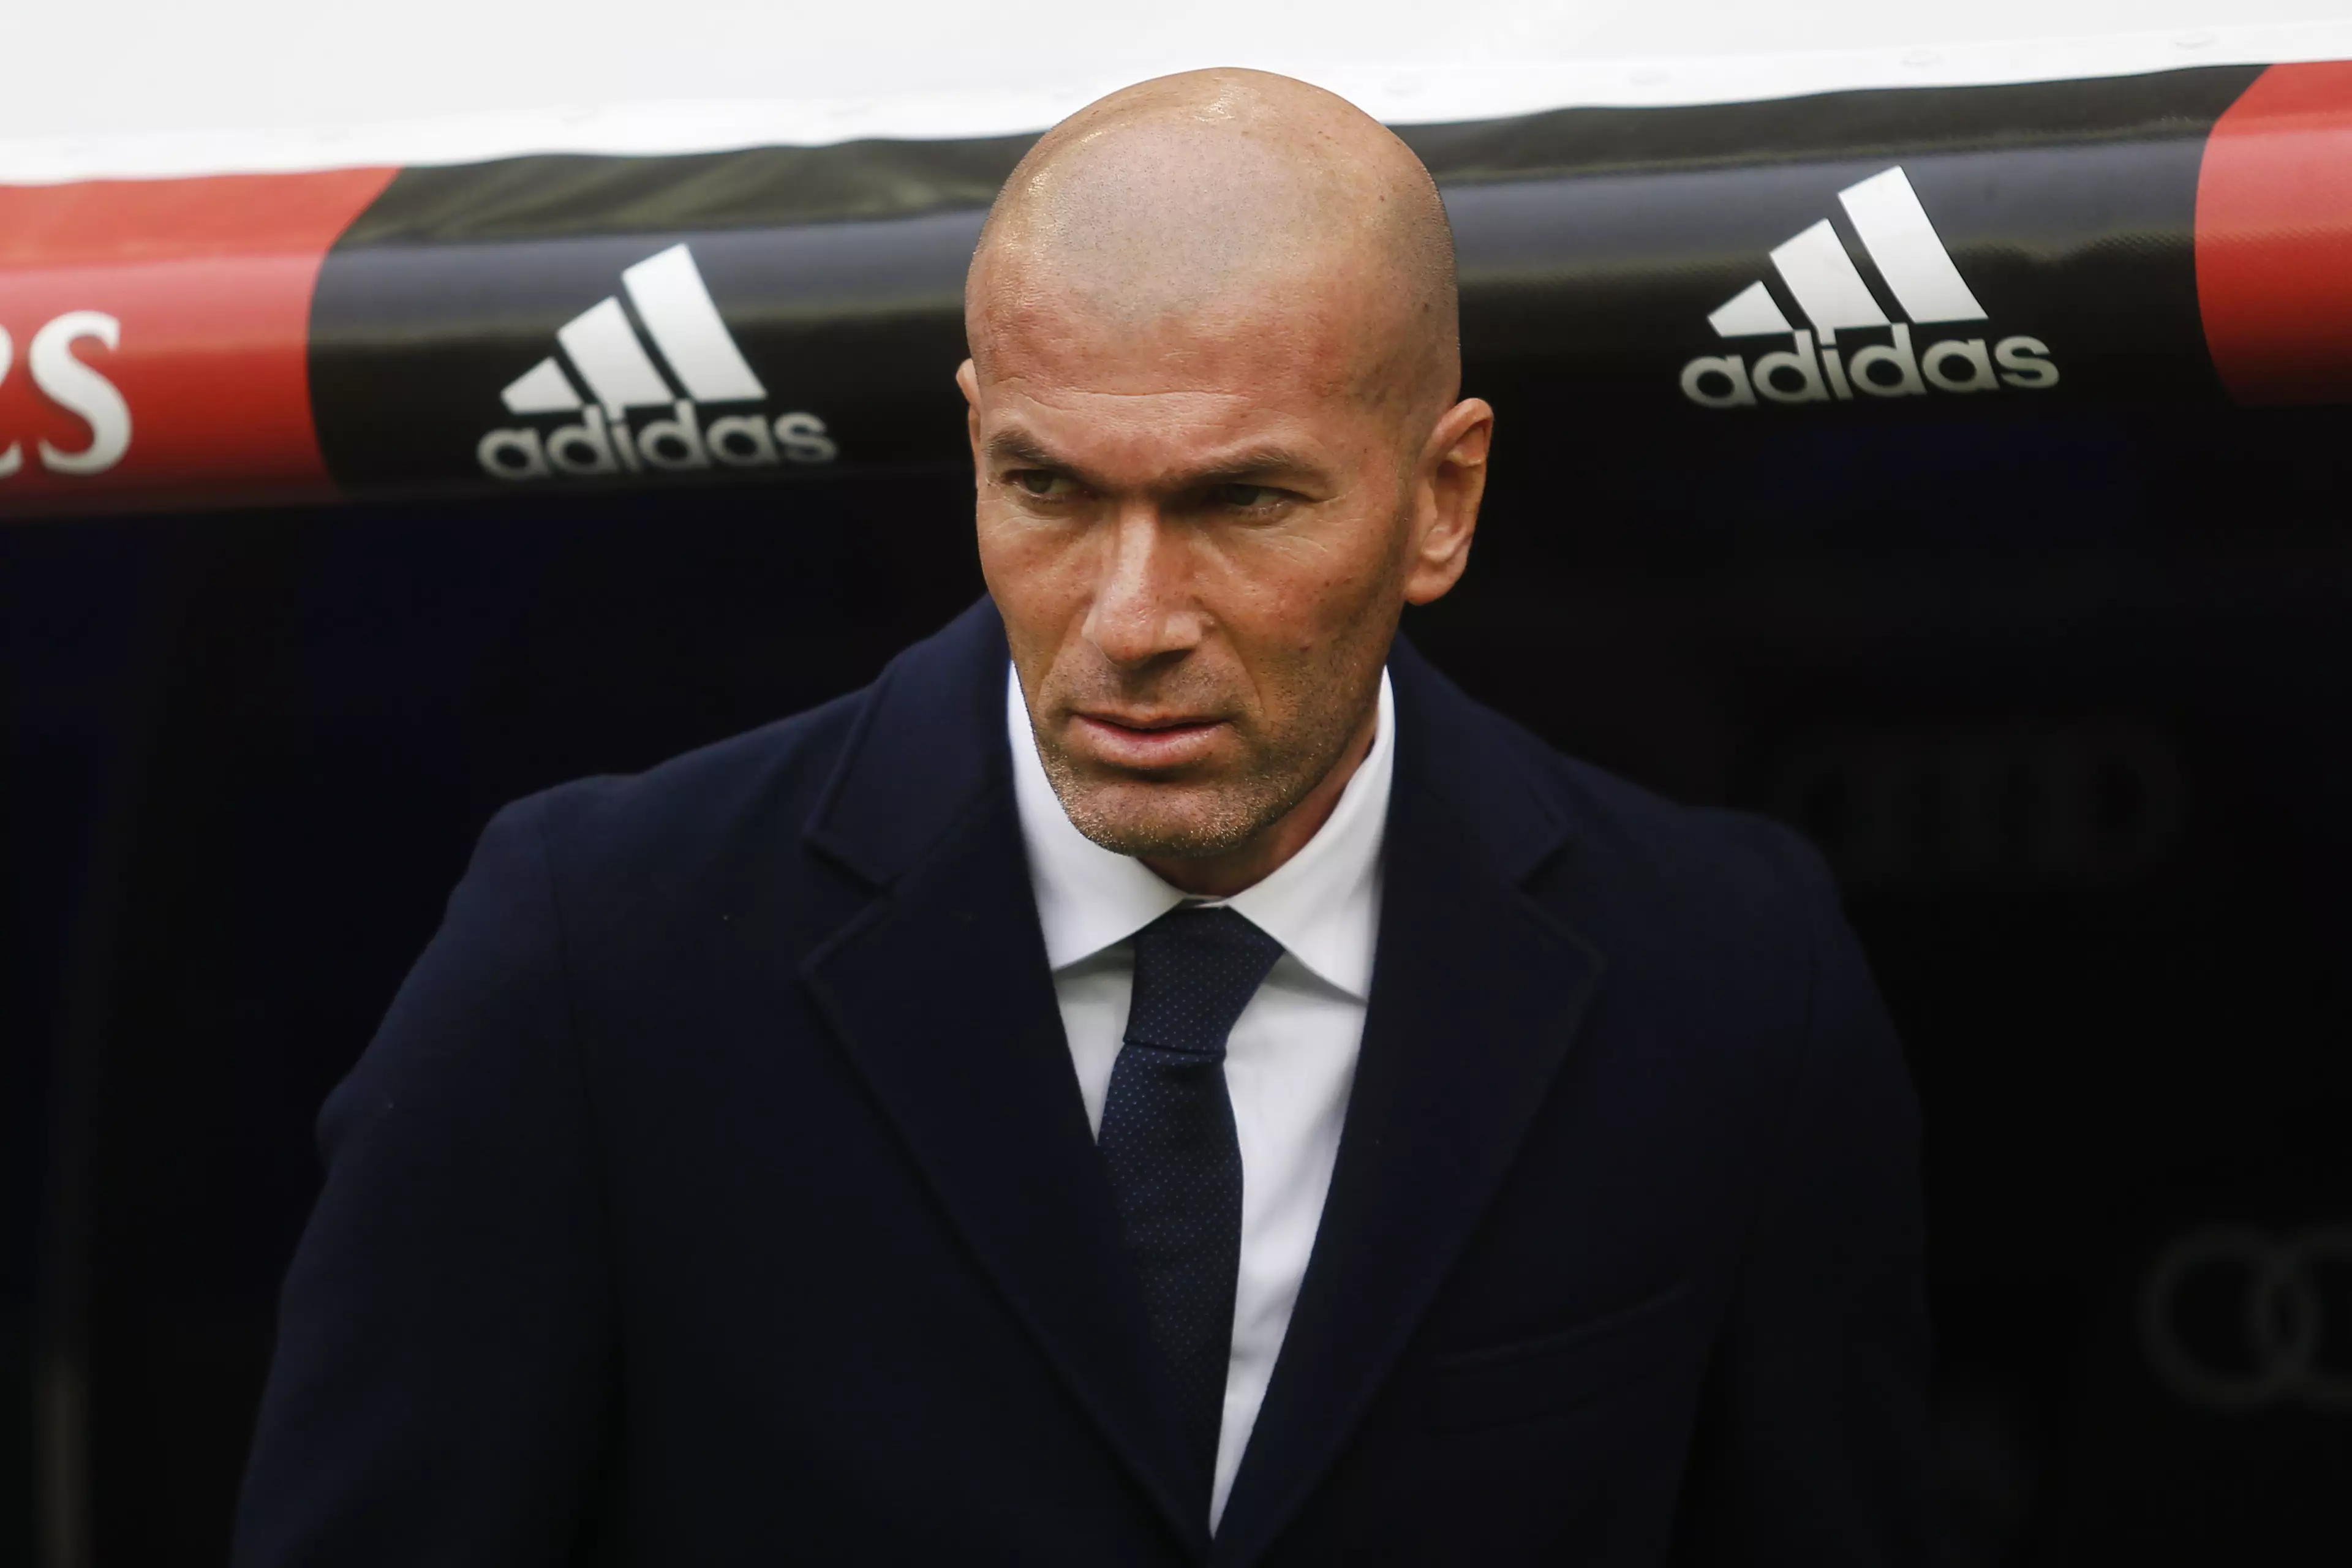 Zidane will be under a lot of pressure if his side lose to PSG. Image: PA Images.